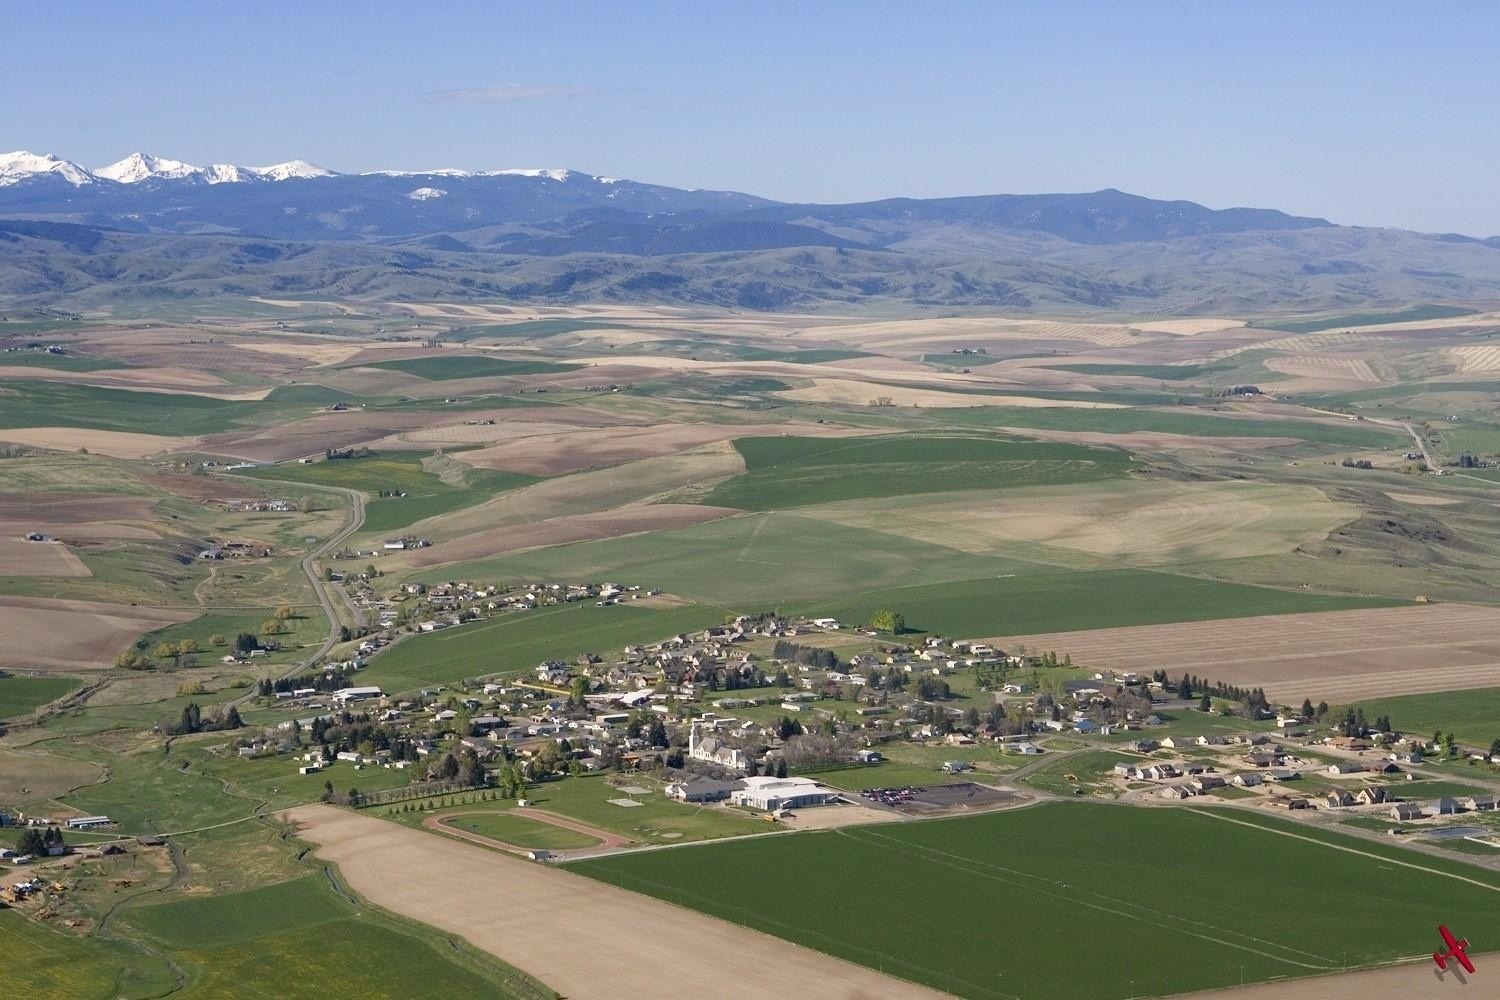 The farming community of Churchill in the middle of the Gallatin Valley.  Is this vision from the past a model for how to cluster growth in the future?  Churchill stands in sharp contrast to the scattershot development patterns sweeping across the Gallatin Valley from Bozeman.